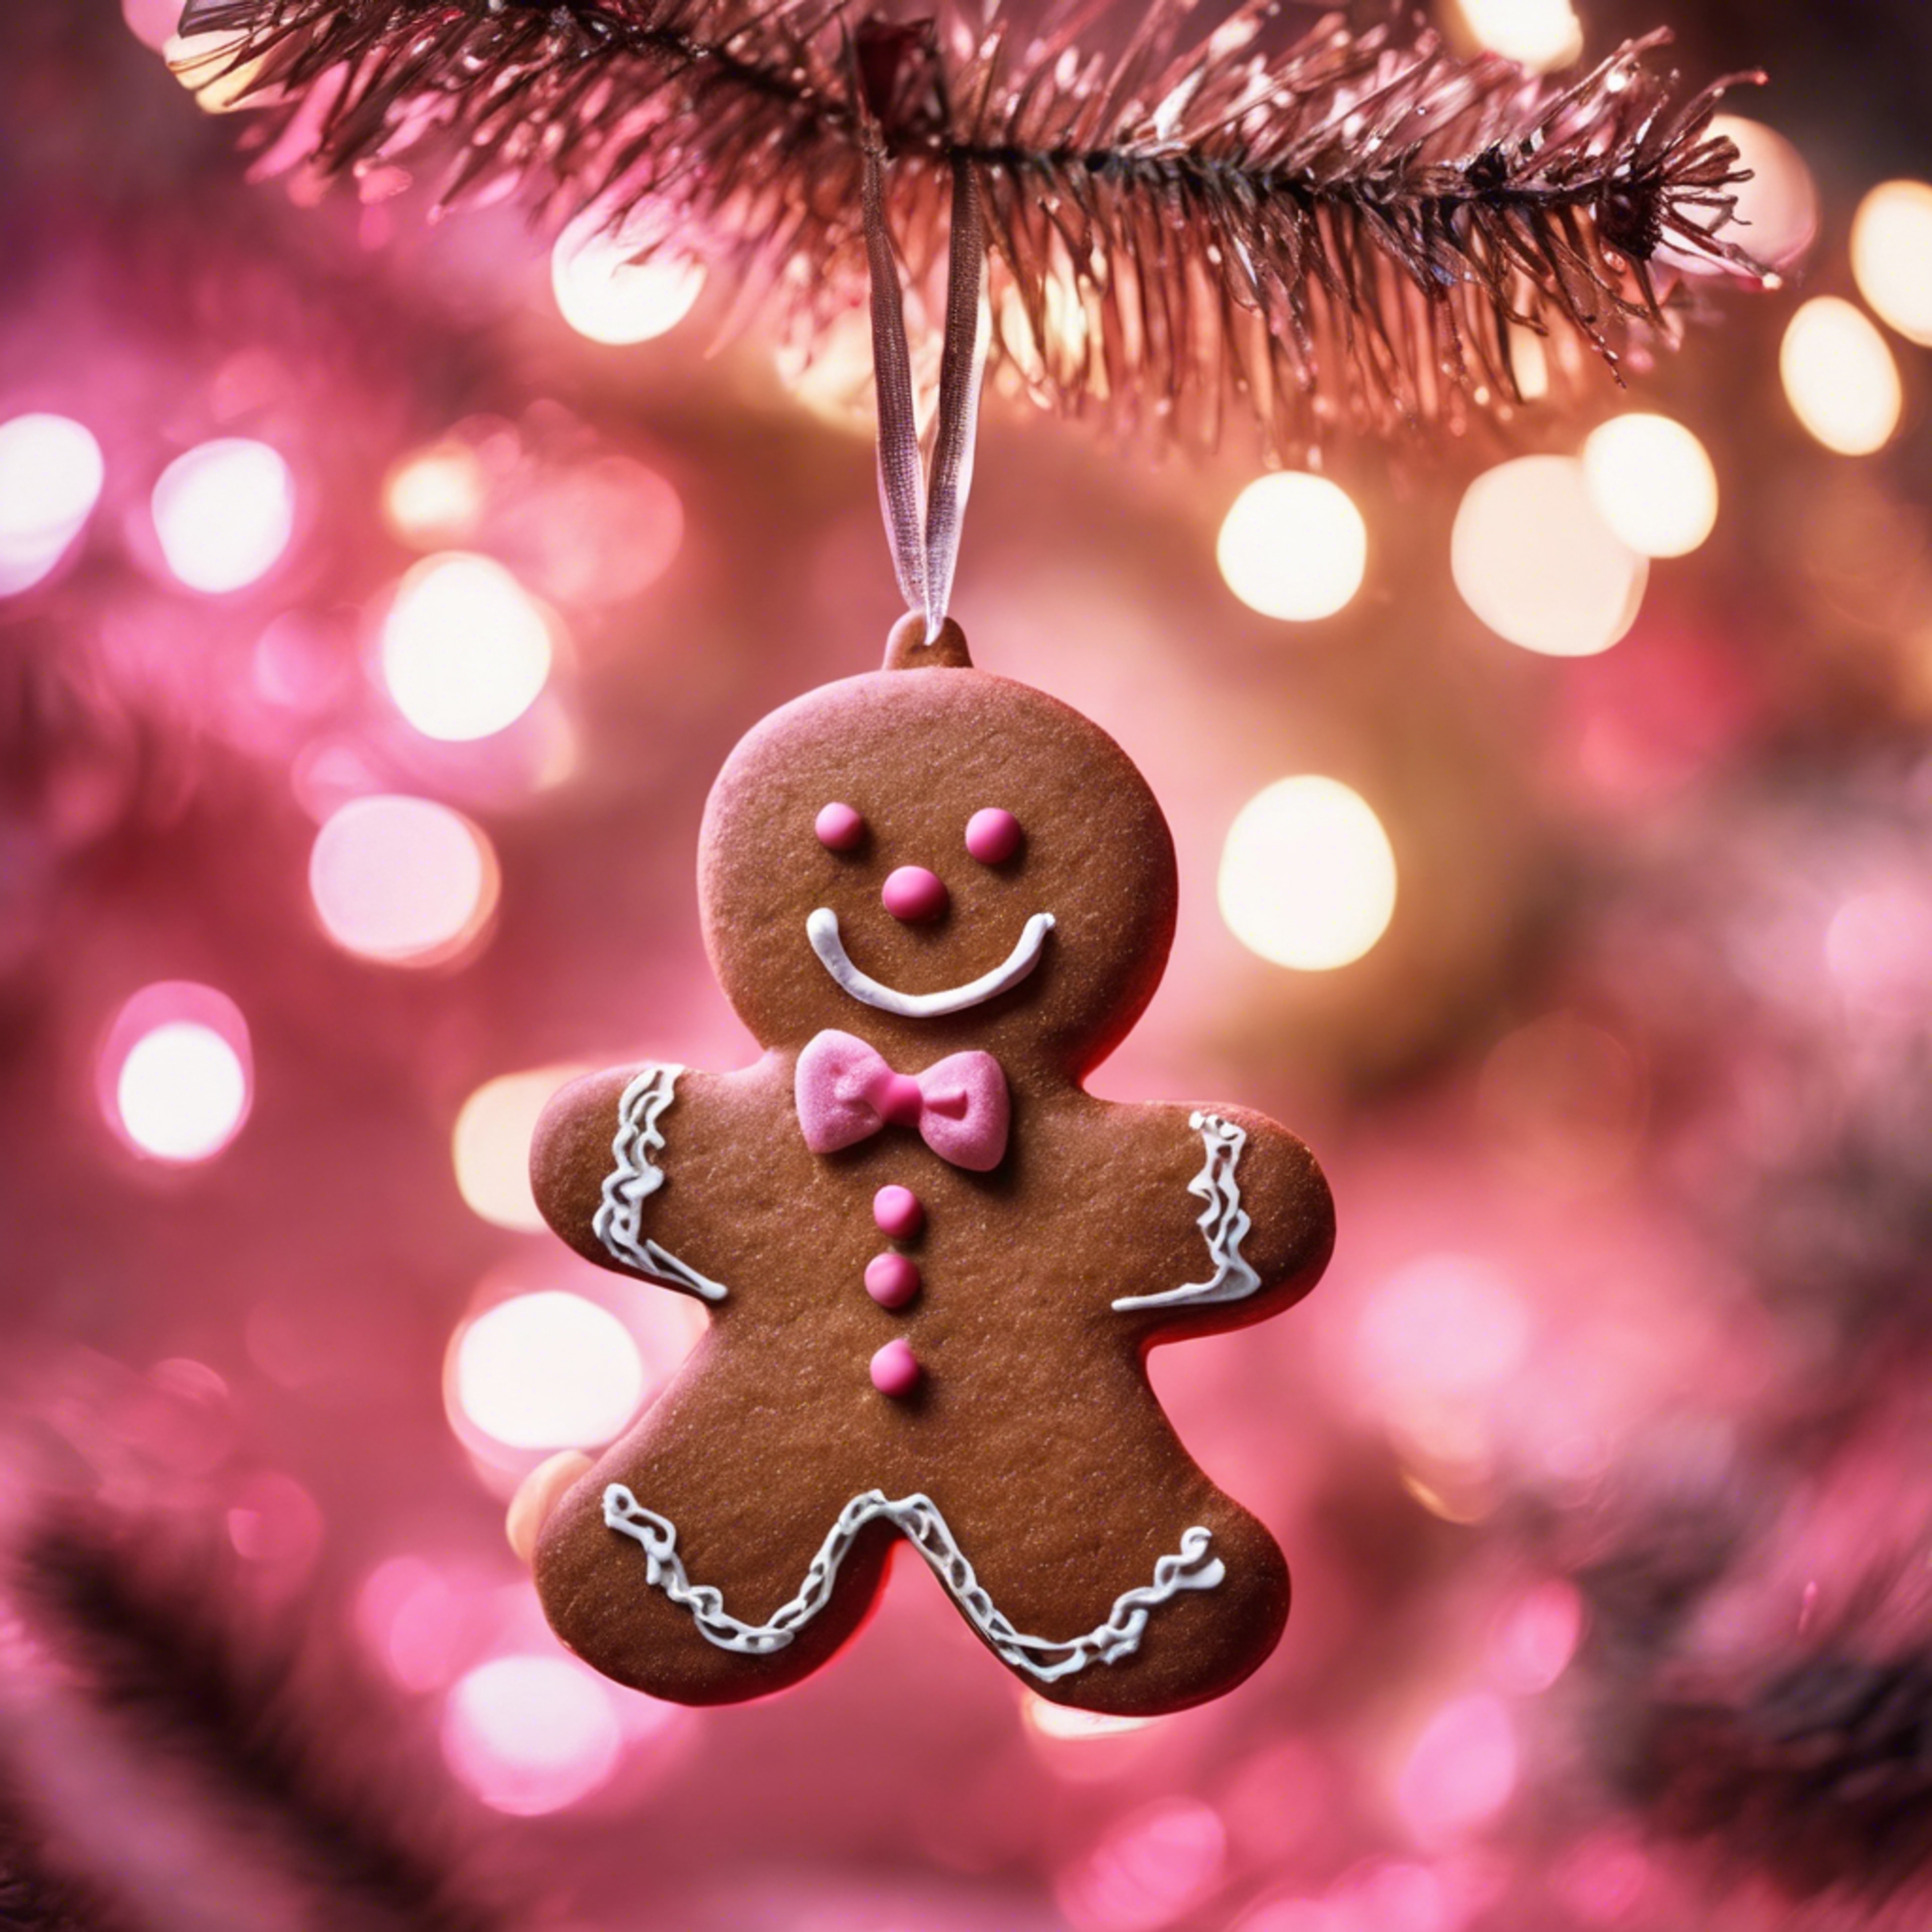 A pink gingerbread man hanging from a beautifully lit Christmas tree.壁紙[d39591ba5d104a9380ea]